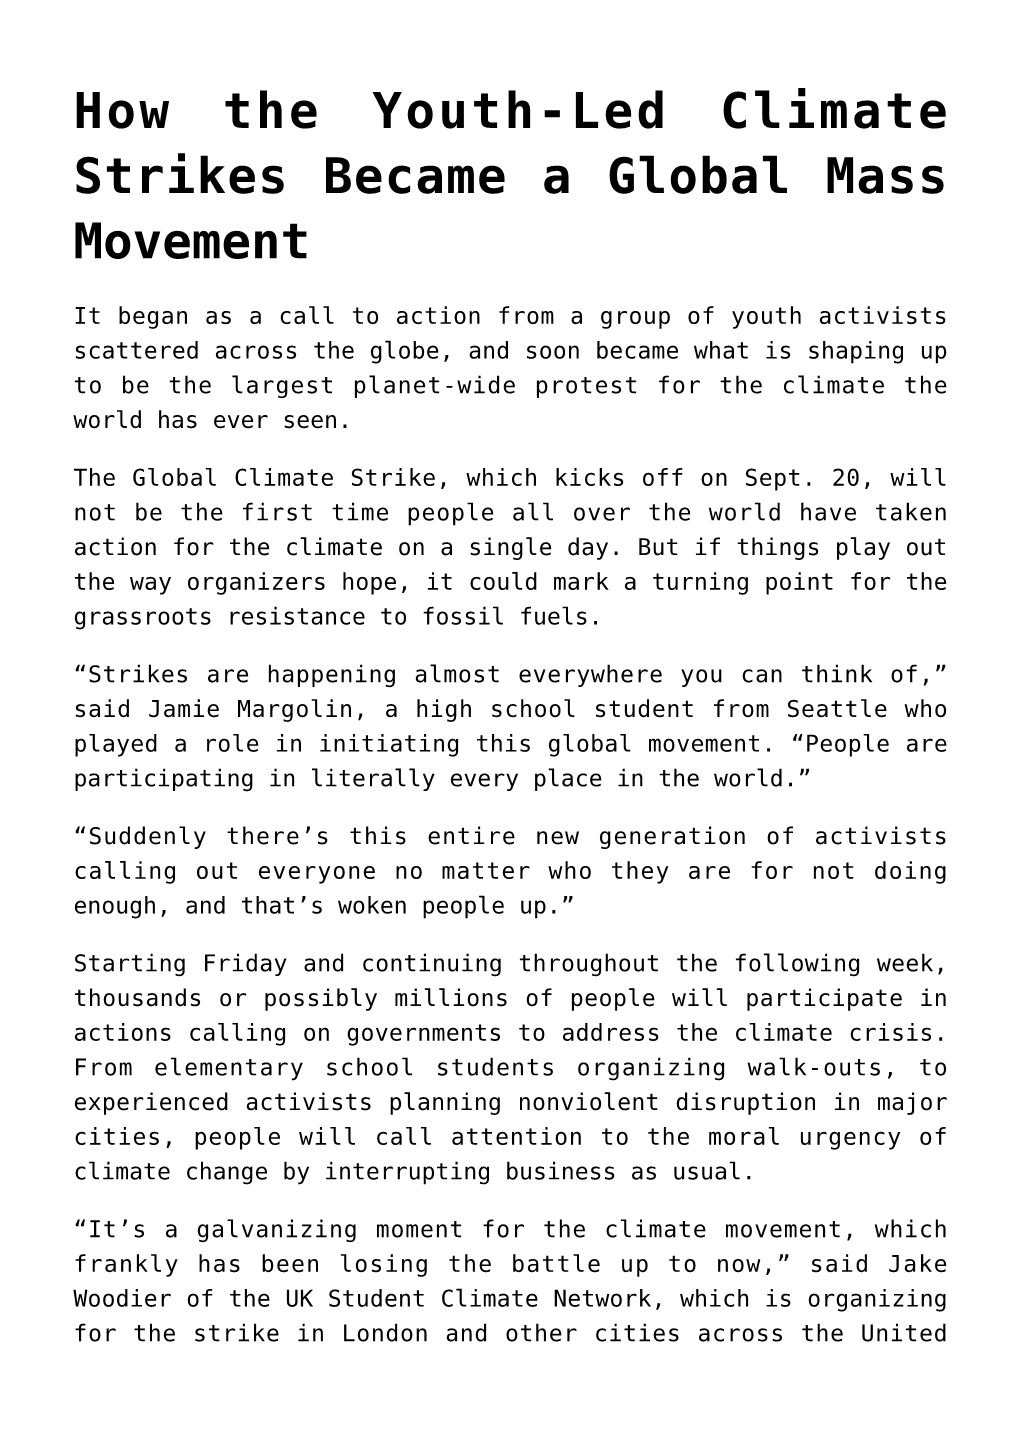 How the Youth-Led Climate Strikes Became a Global Mass Movement